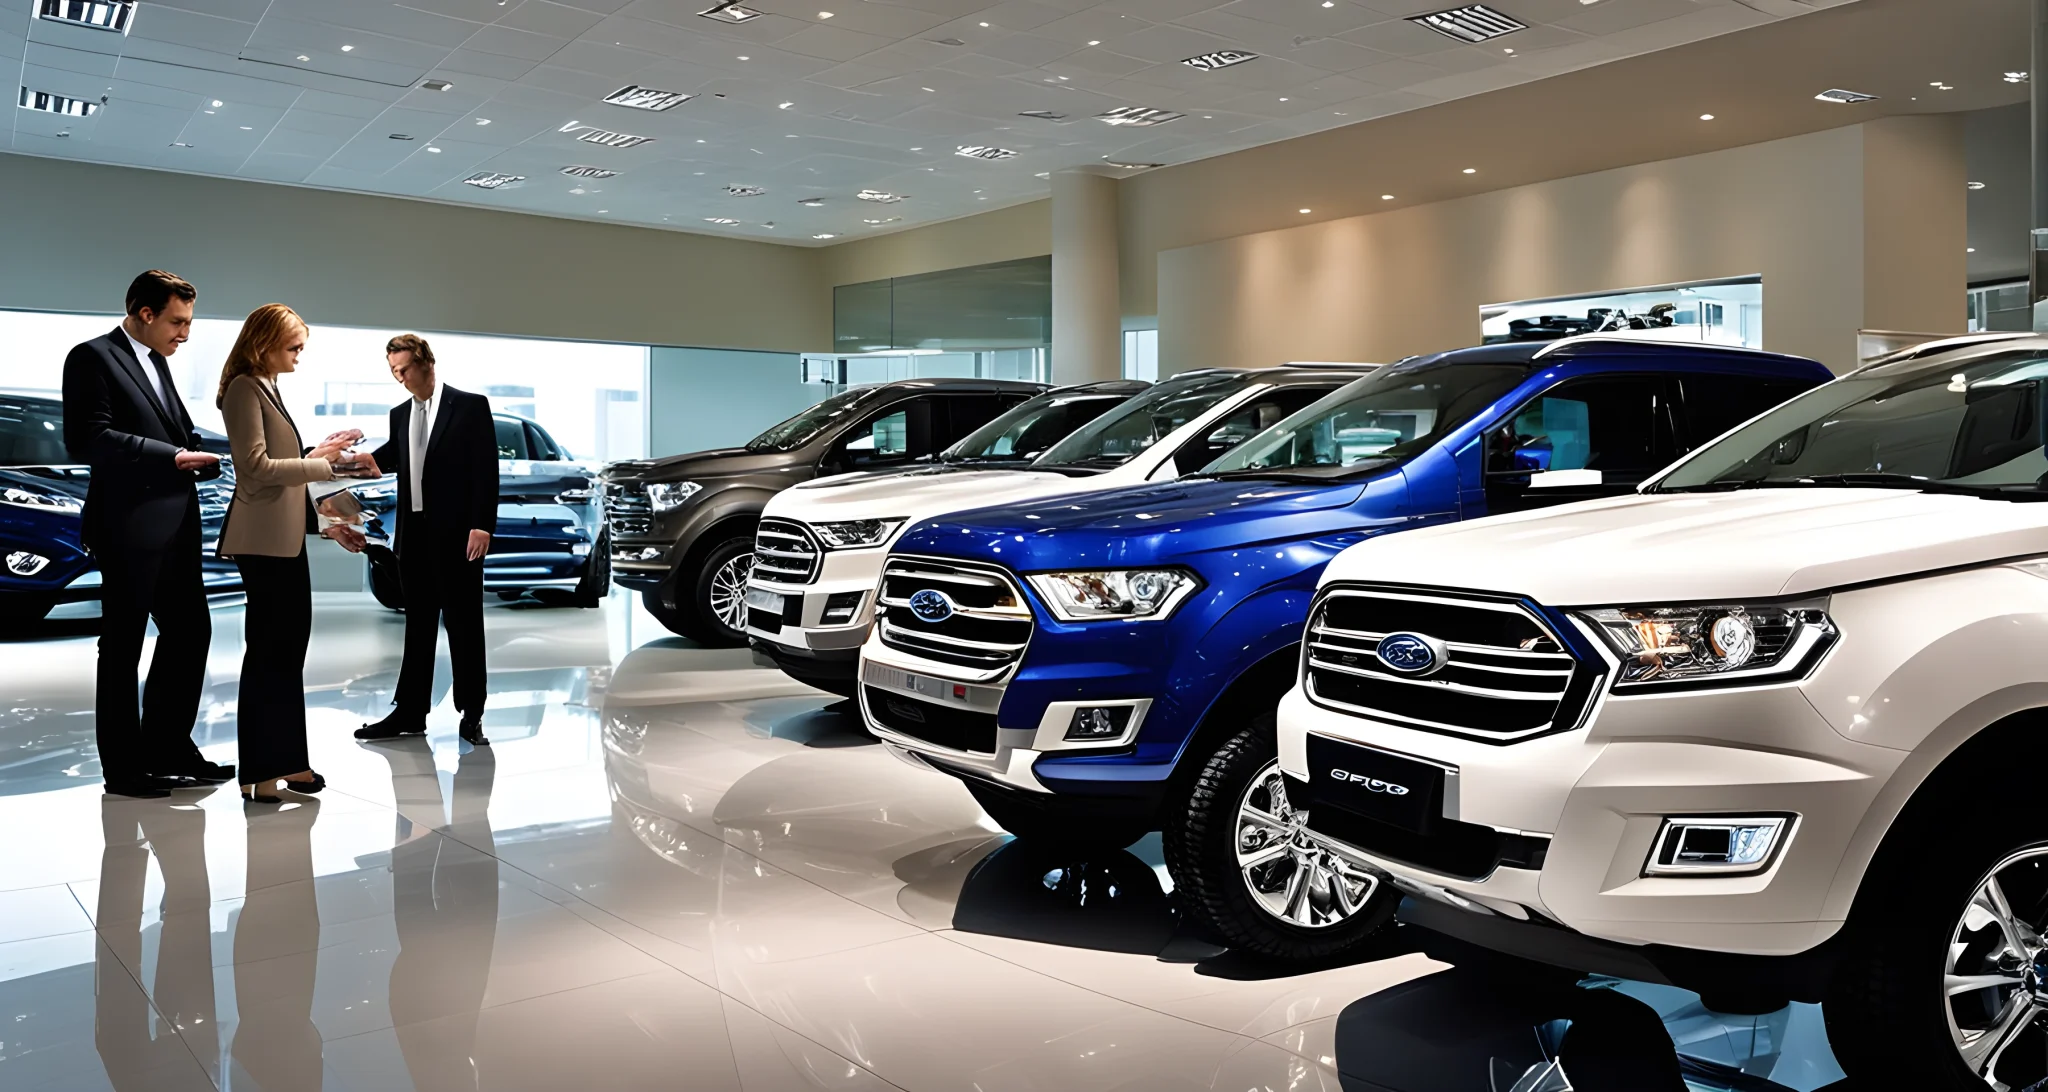 In a car dealership showroom, there are various models of Ford vehicles on display. Sales representatives are talking to customers, and the negotiation process can be seen taking place.